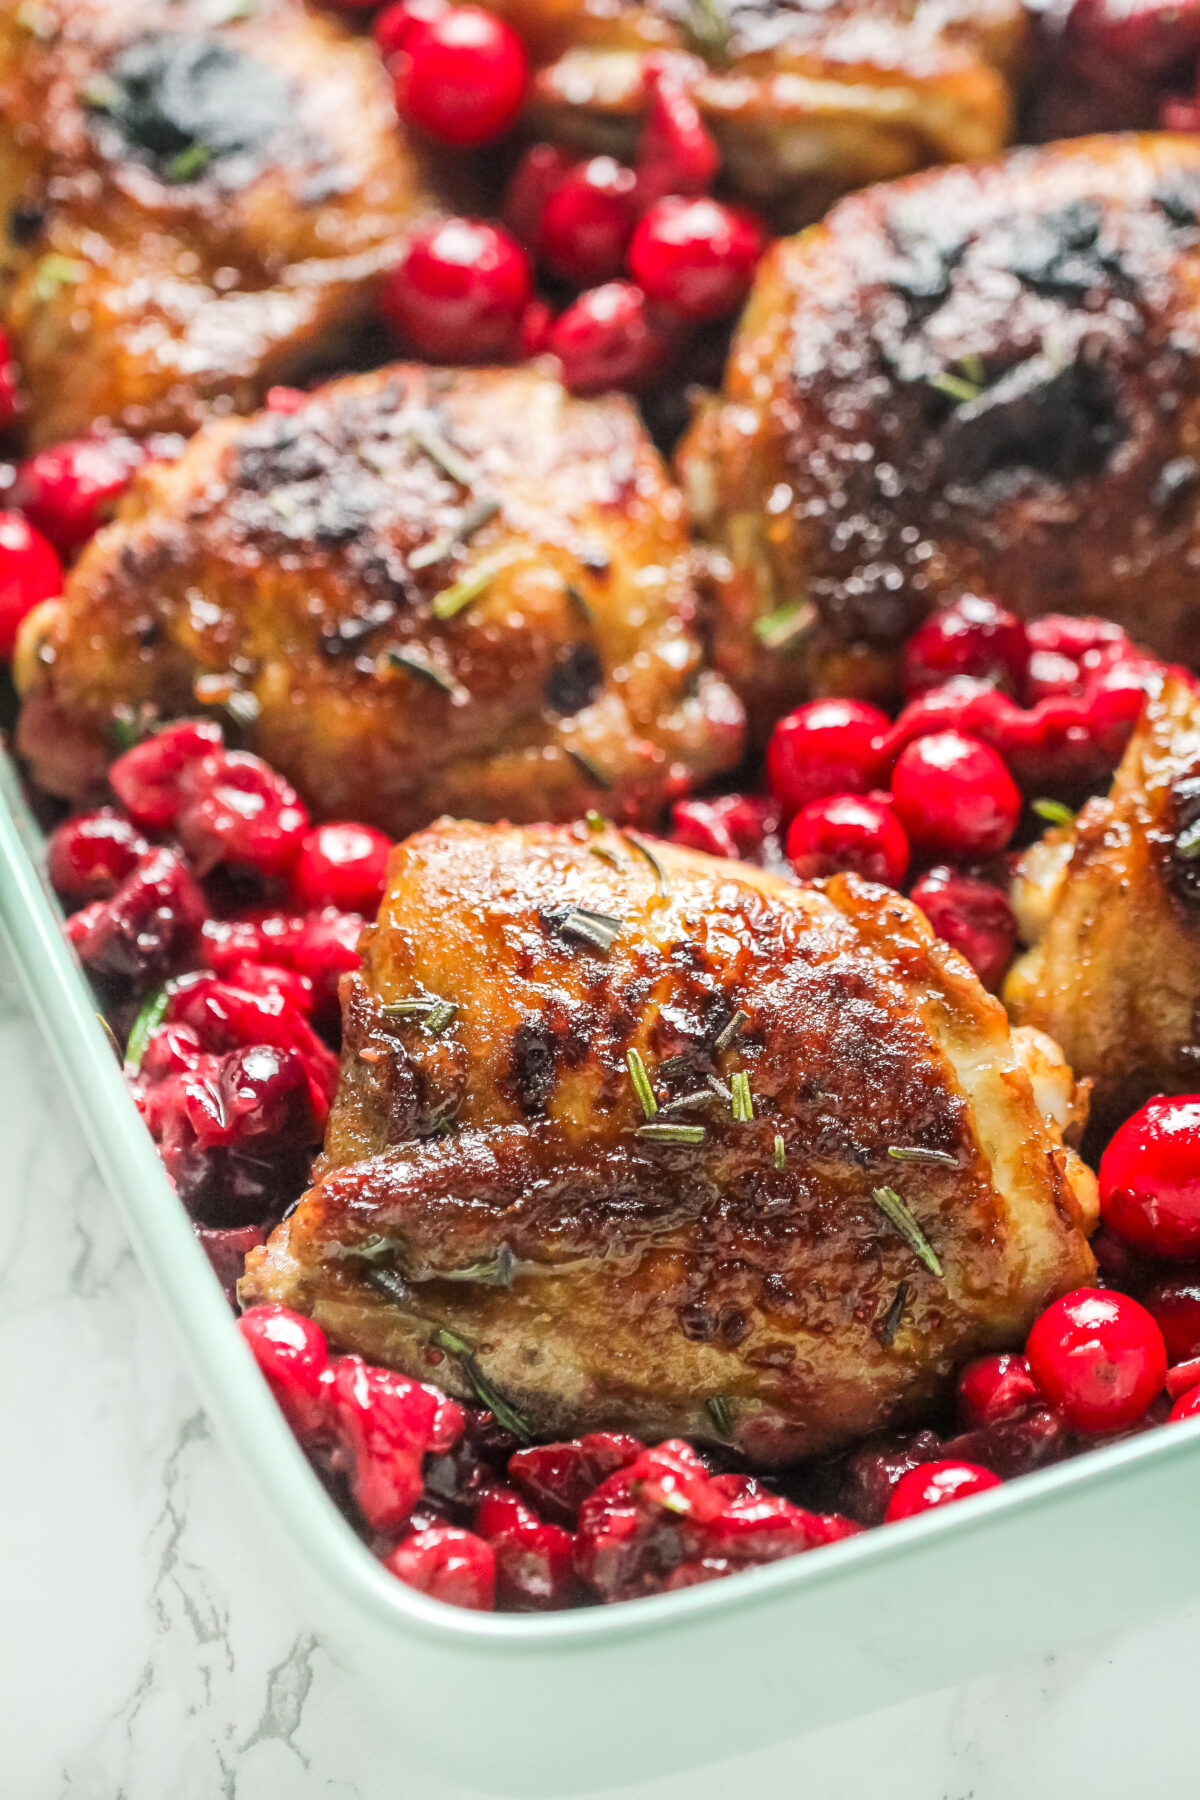 This easy cranberry chicken recipe is a delicious way to feed the family over the holidays or any time you want a good home cooked meal.